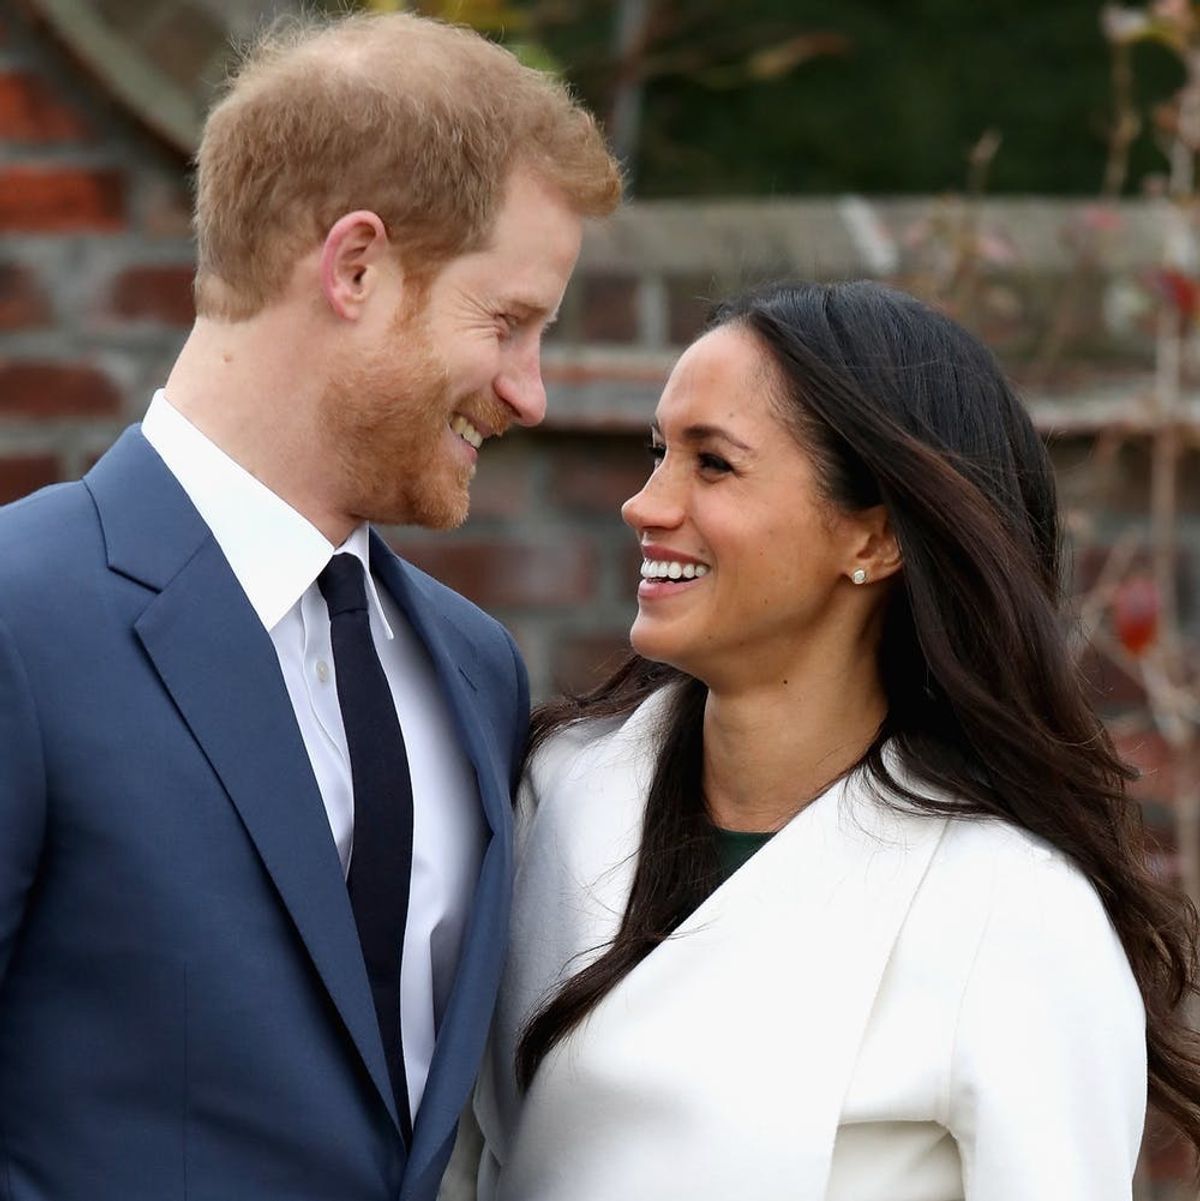 Prince Harry and Meghan Markle’s Engagement Means a Lot More Than Just Another Royal Wedding